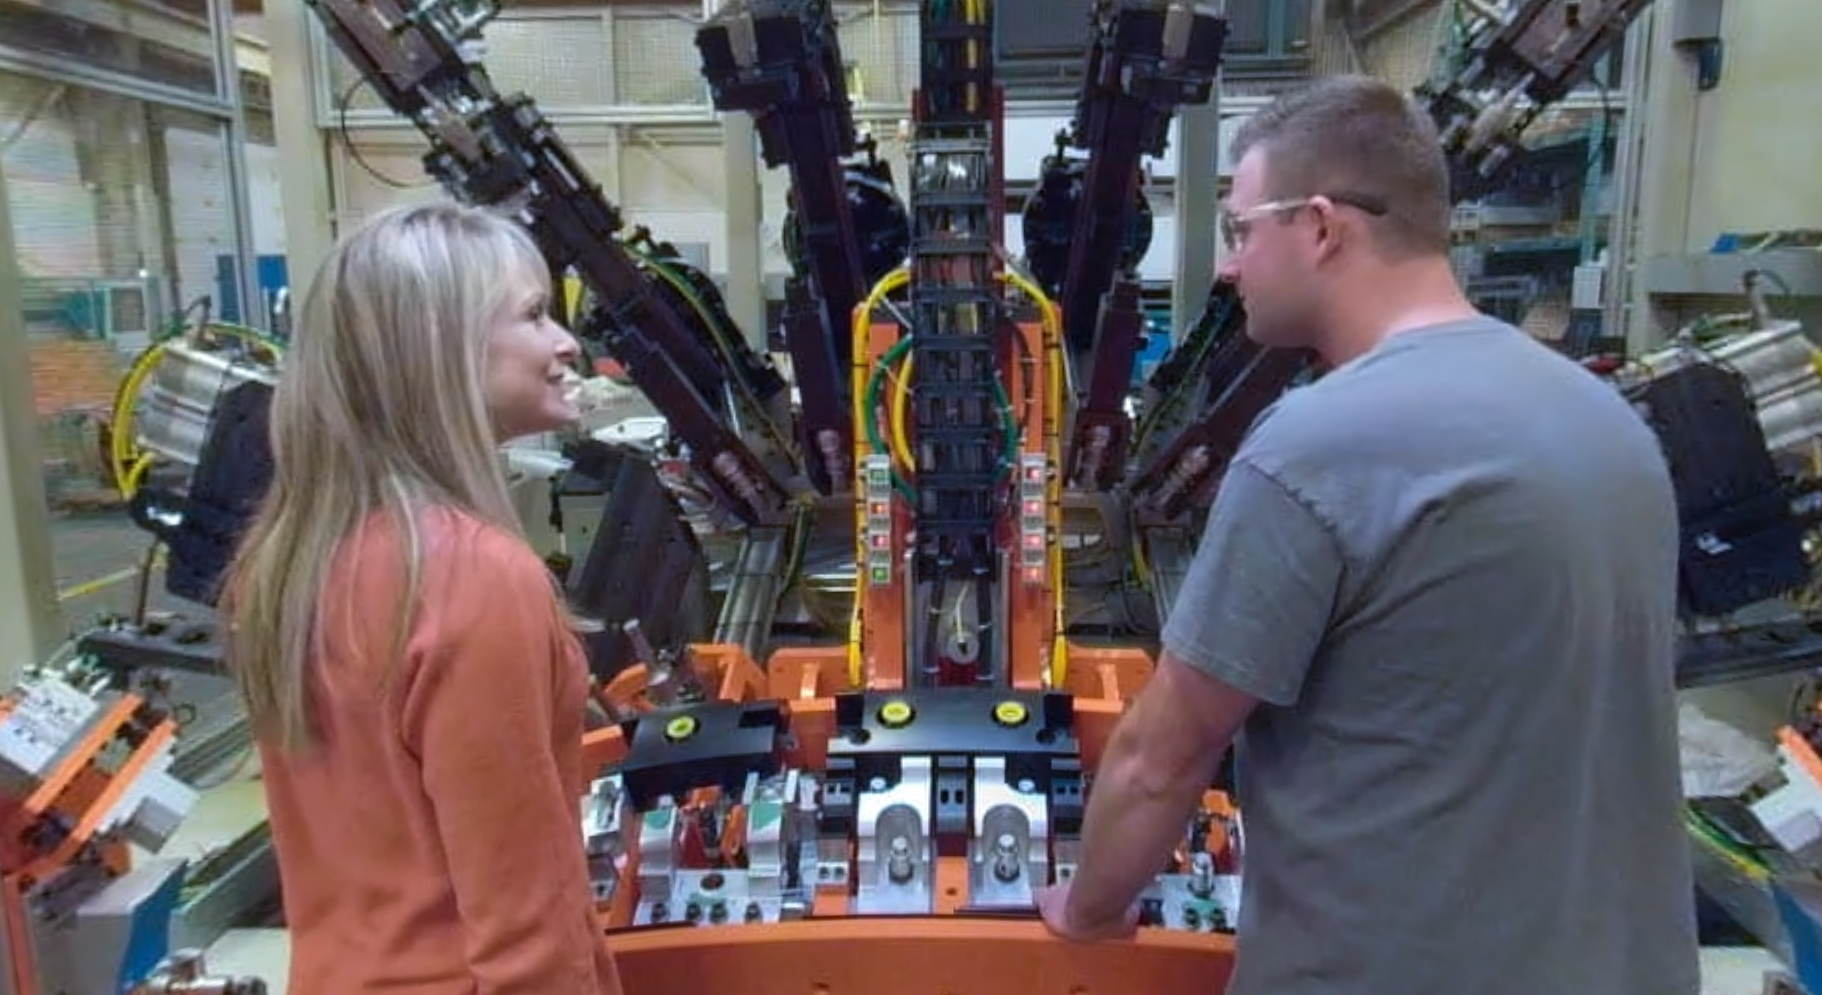 Two people in front of machinery at a manufacturing facility